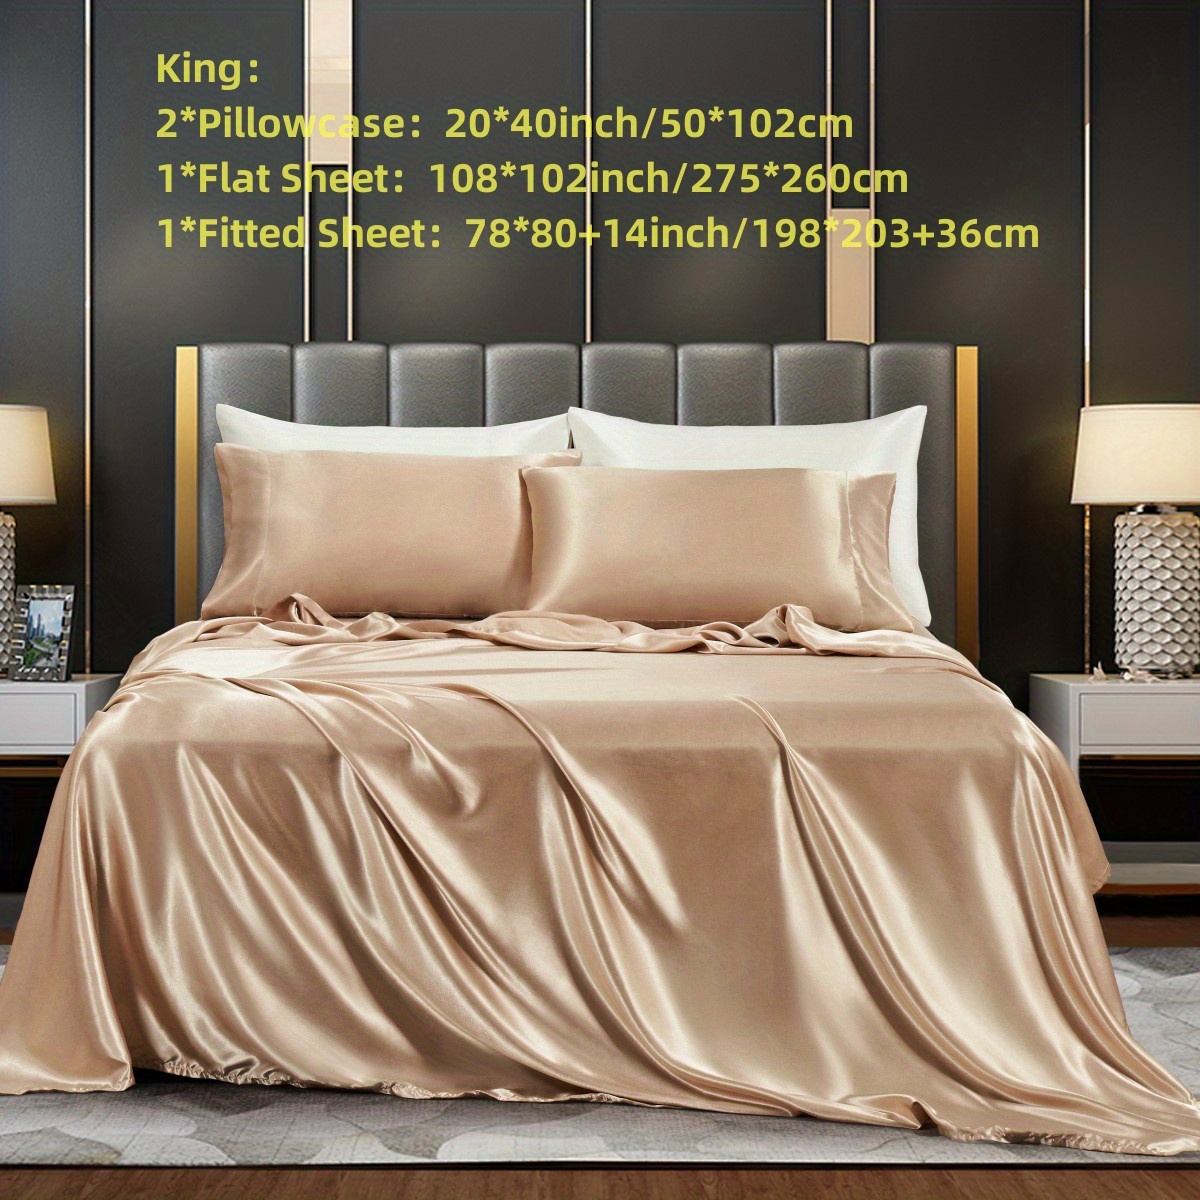 4PCS Queen Size Sheet Set Luxury Smooth Soft Satin Bed Sheets Flat